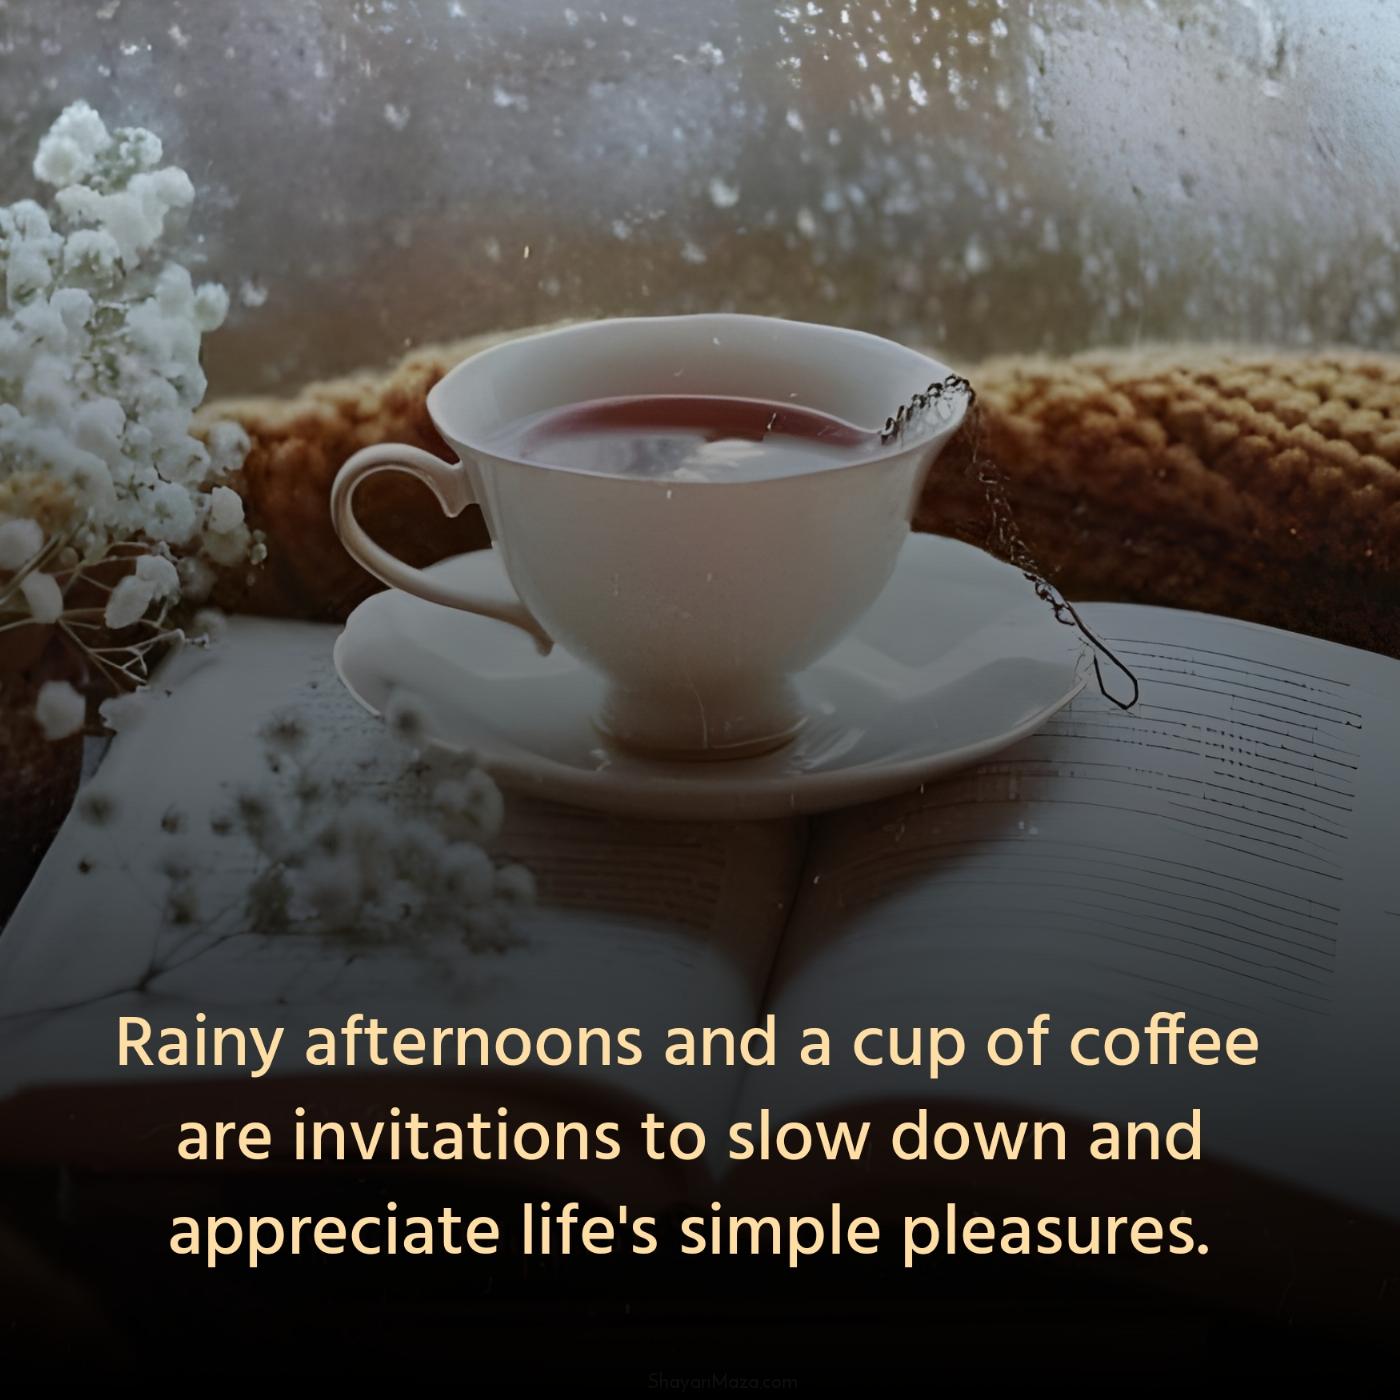 Rainy afternoons and a cup of coffee are invitations to slow down